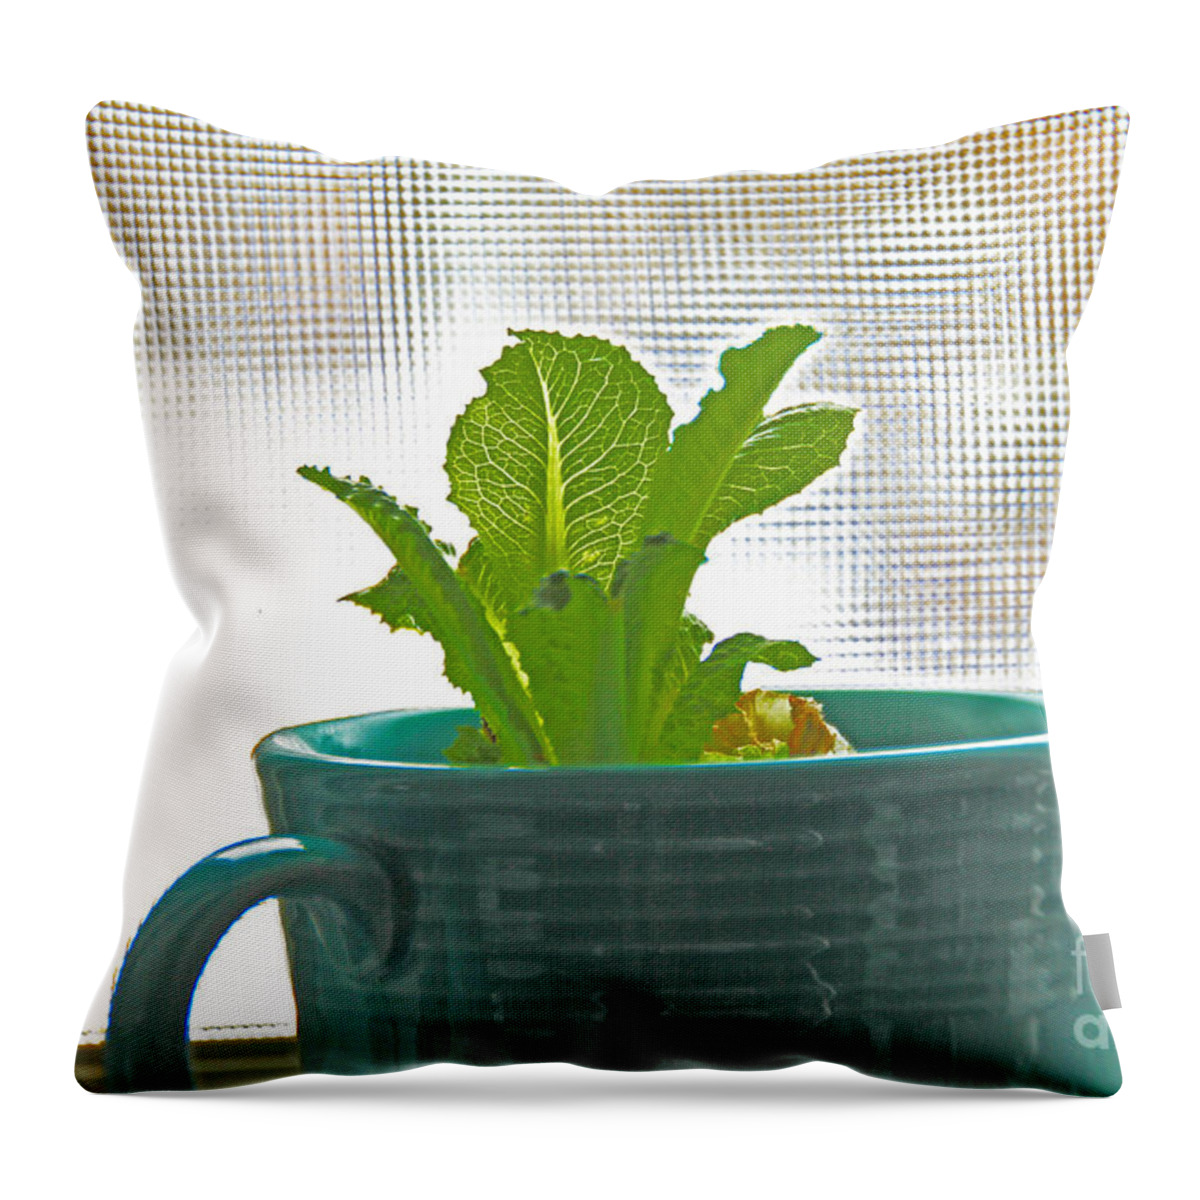 Lettuce Throw Pillow featuring the photograph Lettuce Leaves In Cup by David Frederick